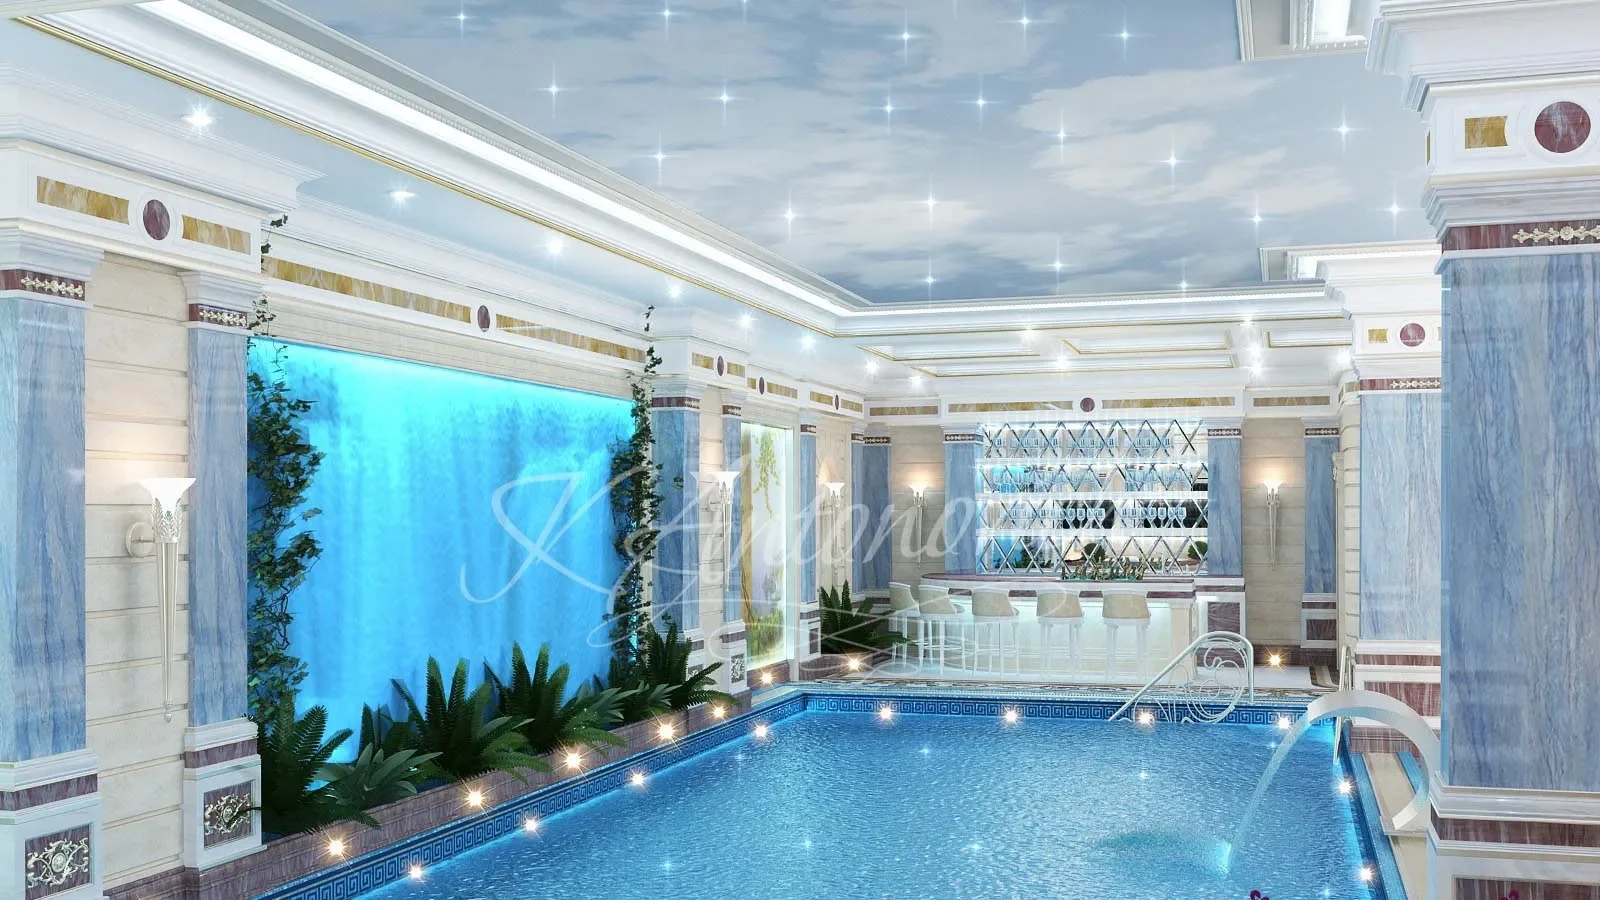 6 Best Indoor Swimming Pool Designs – Forbes Home